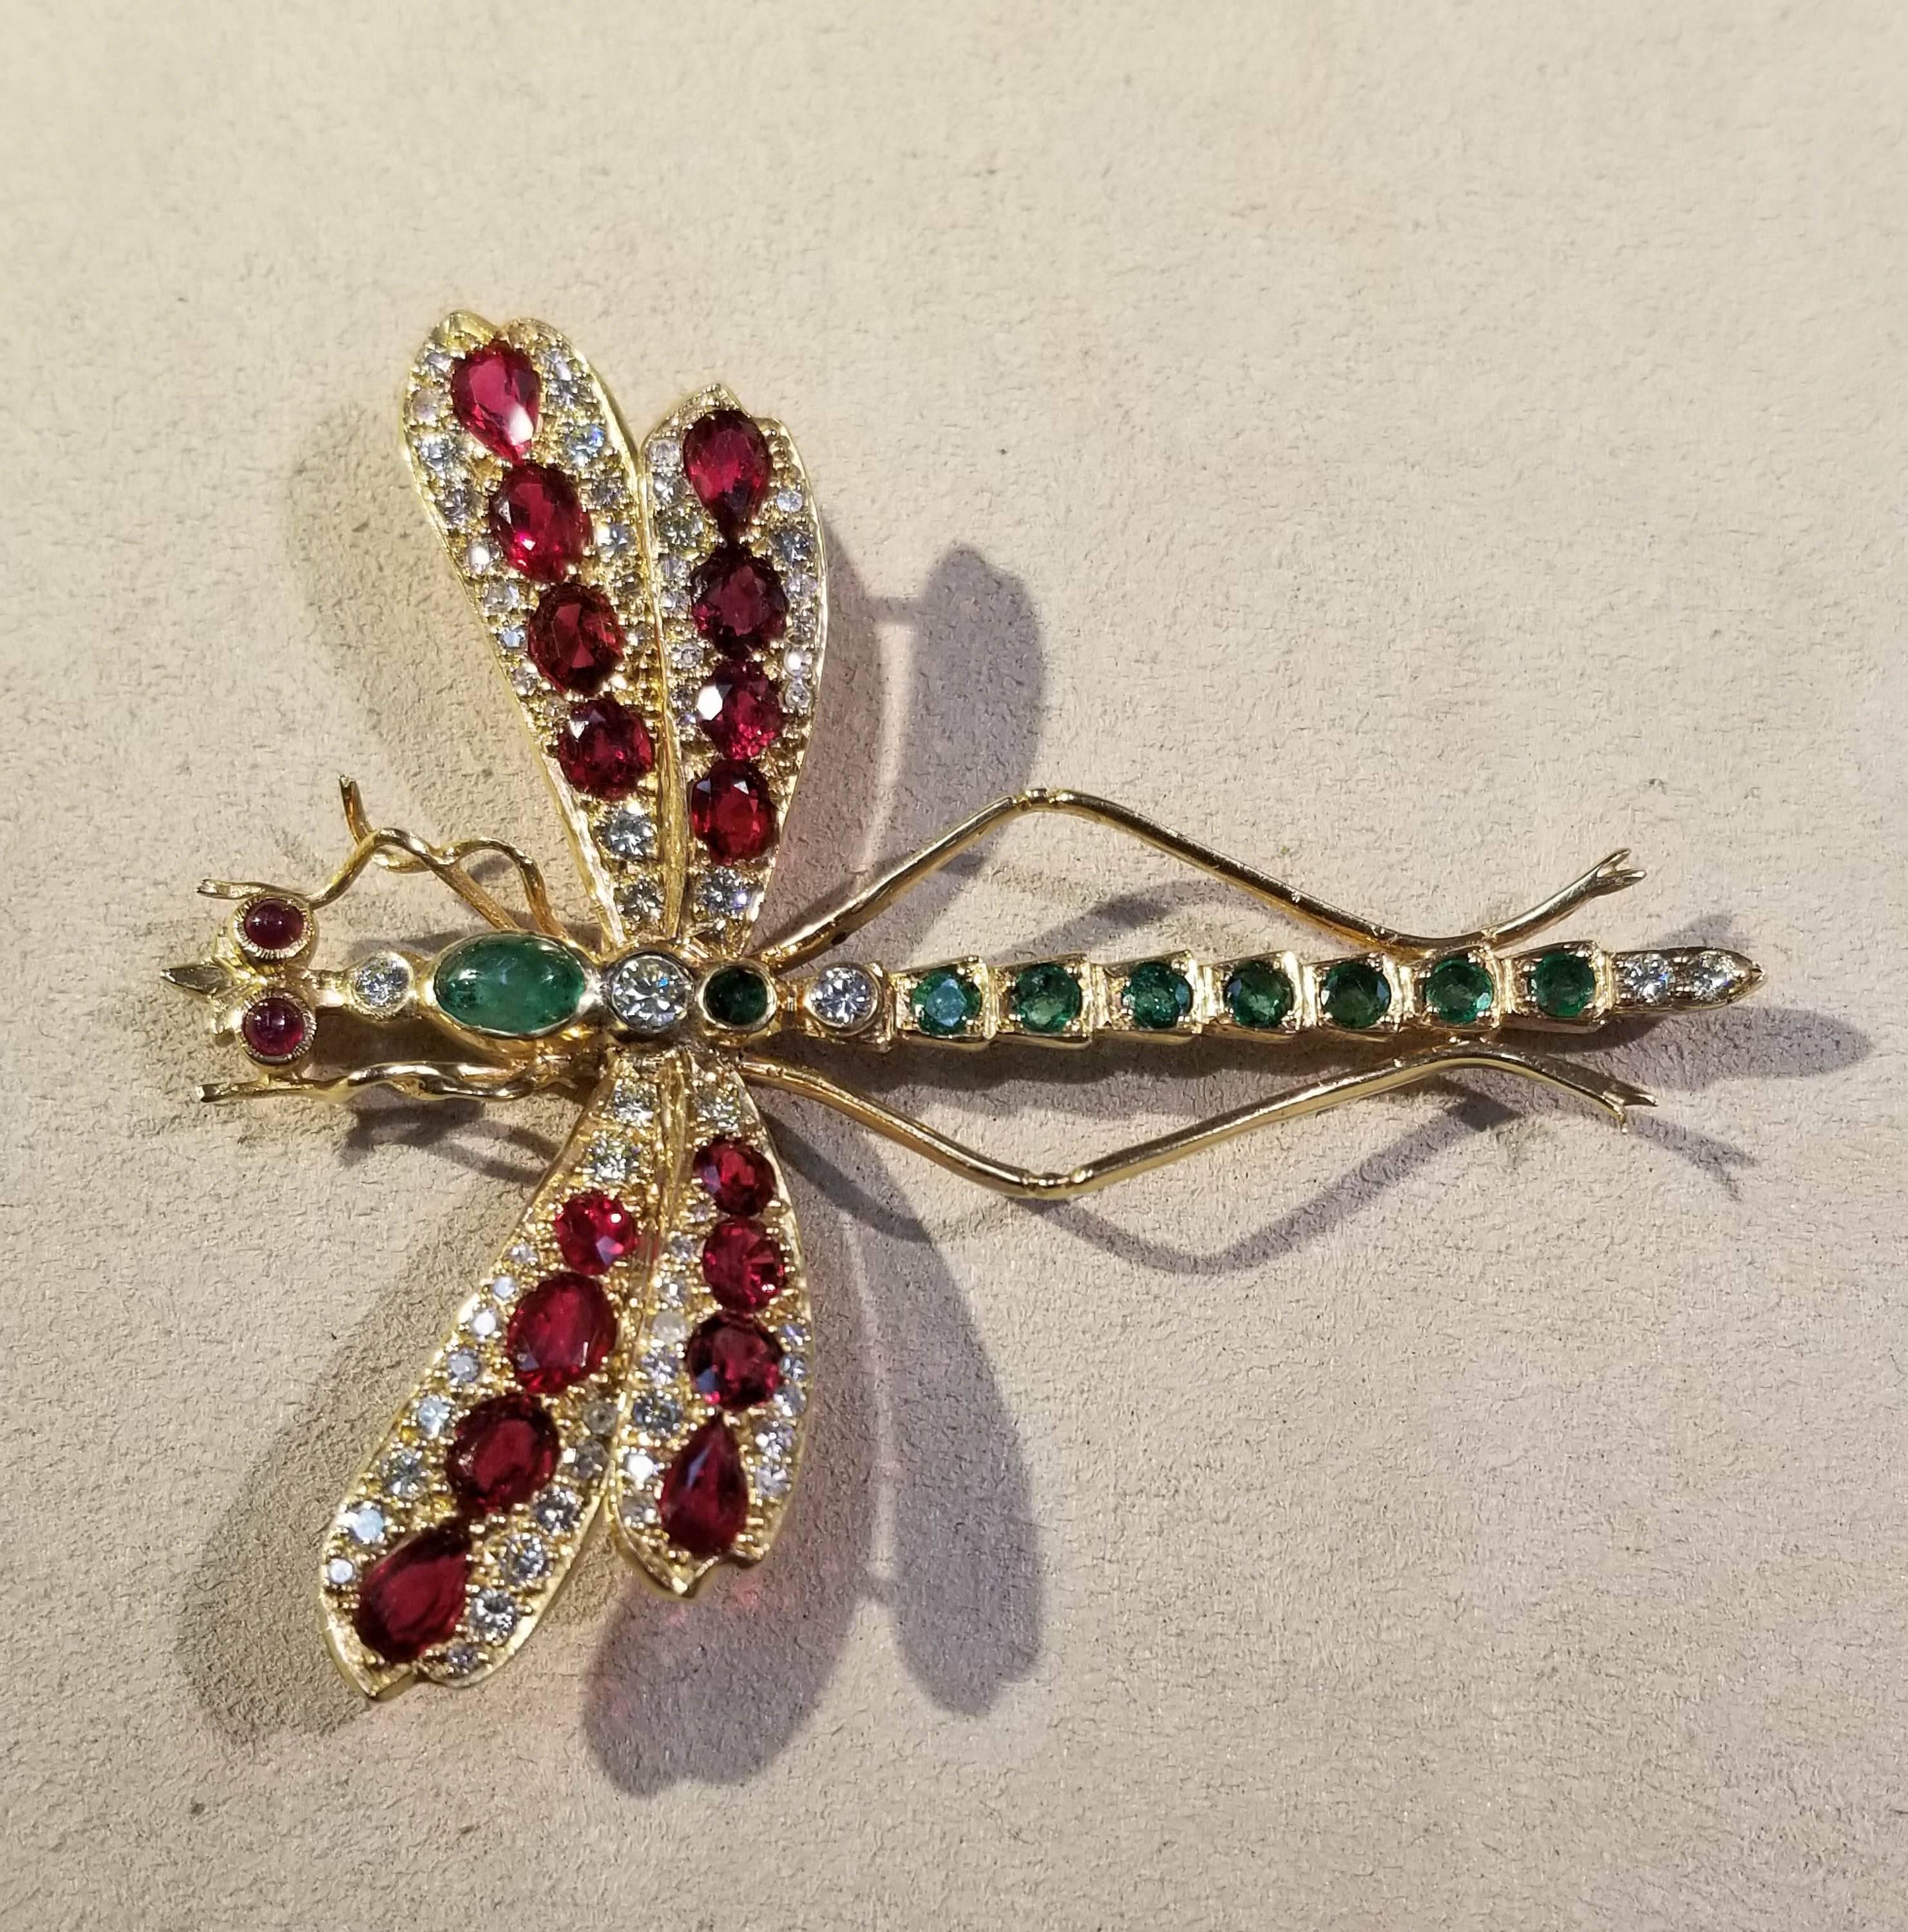 Dragonfly Pin, 14k Yellow Gold.
The pin has diamonds, rubies, and emeralds.
Diamonds: FGH in color, SI in clarity, and 2.08 cts. 
Rubies: SI in clarity and 4.21 cts.
Emeralds: SI-I in clarity and 1.65 cts.